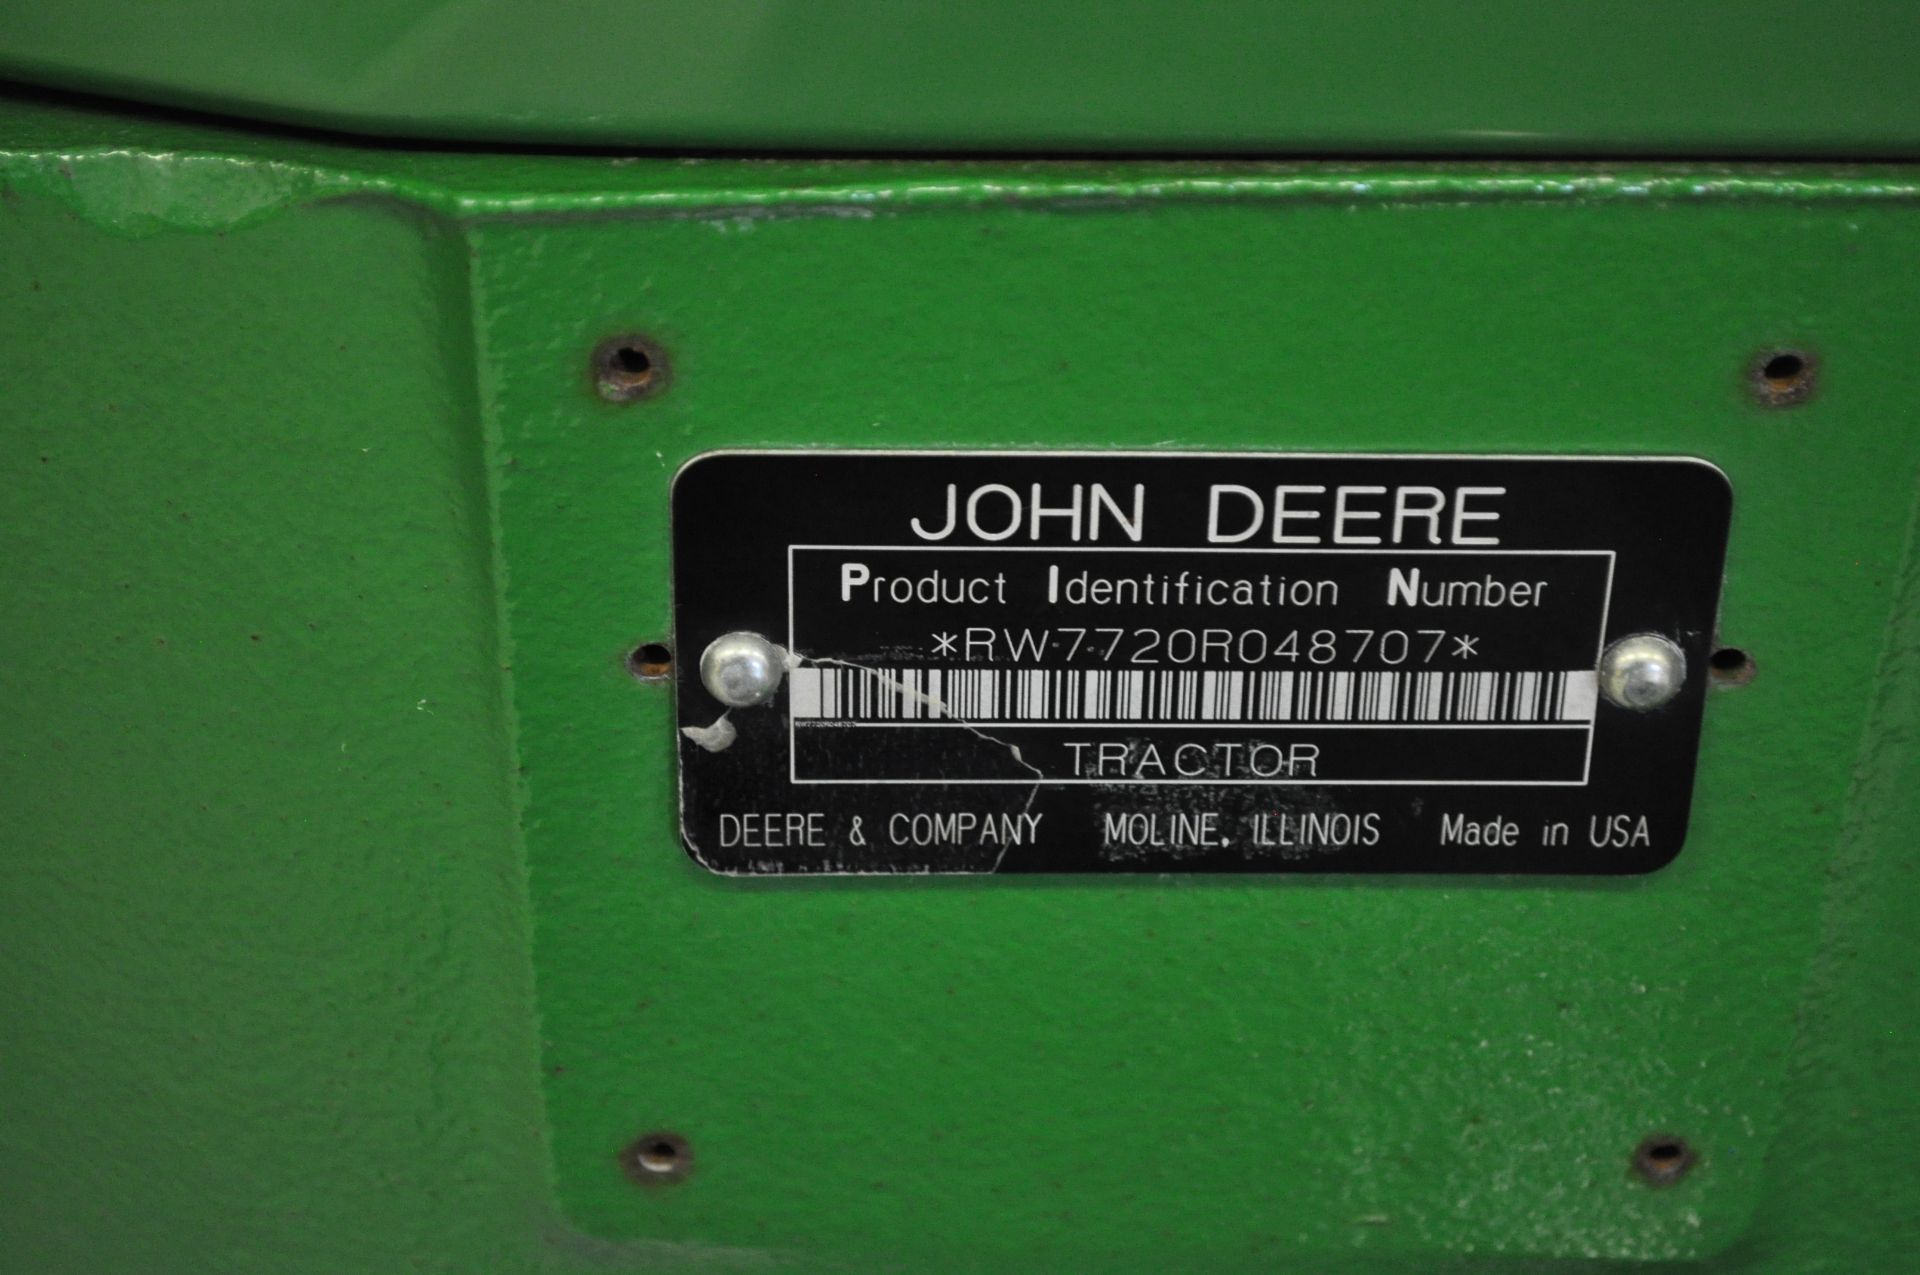 John Deere 7720 tractor, 480 / 80 R 42 rear, 14 L-16.1 tires, 3 hyd remotes, 3 pt - Image 6 of 14